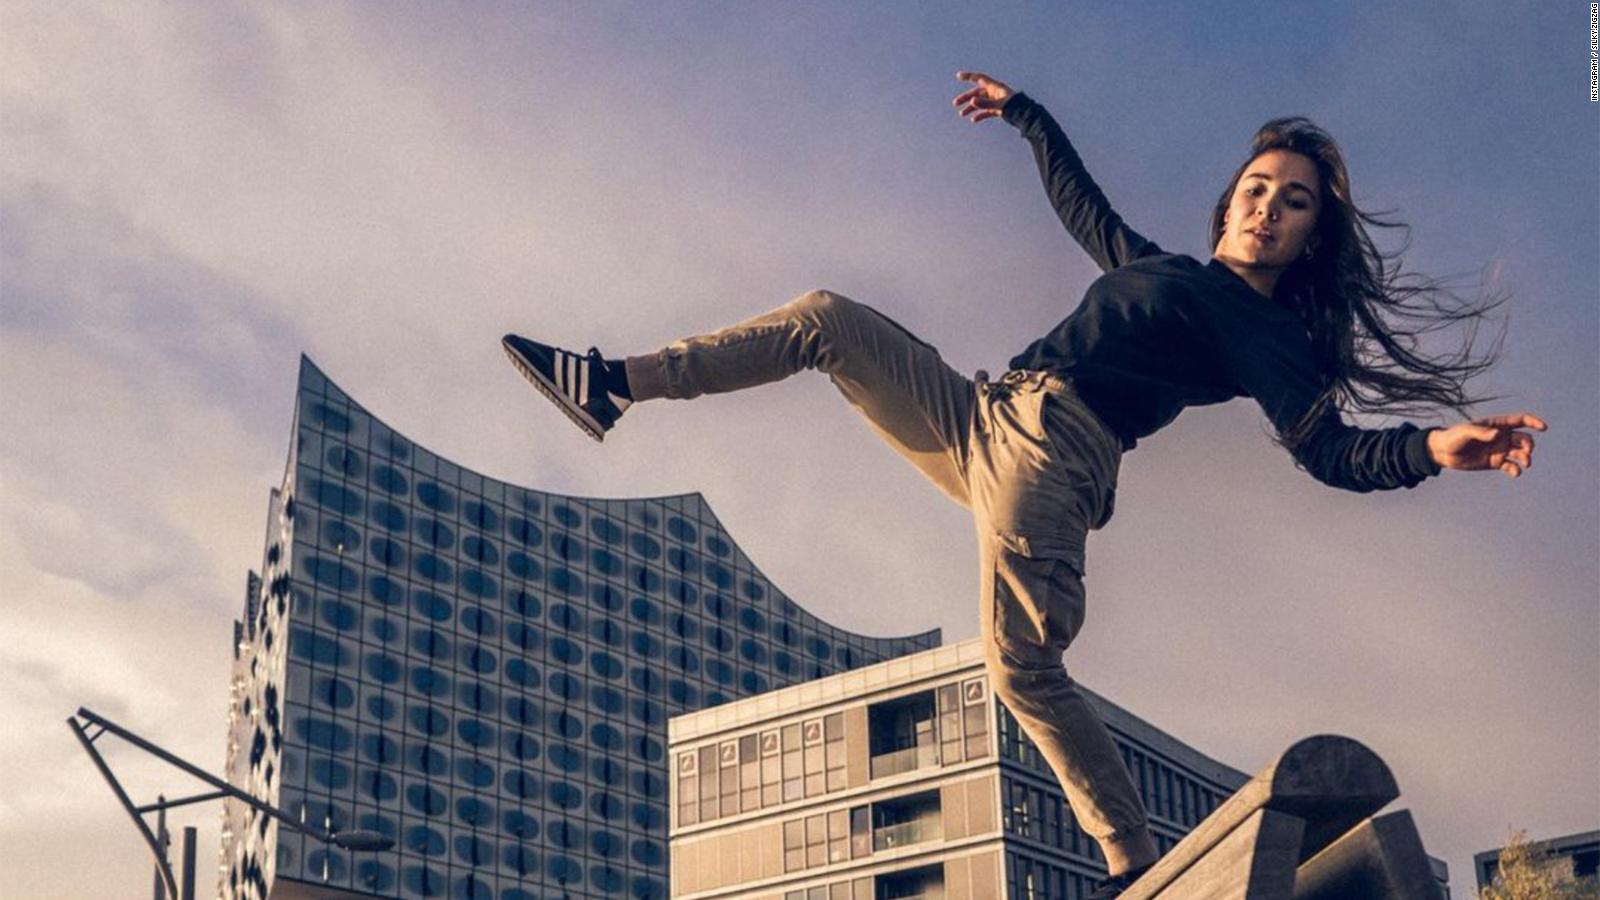 Silke Sollfrank wants to encourage more women to take up parkour